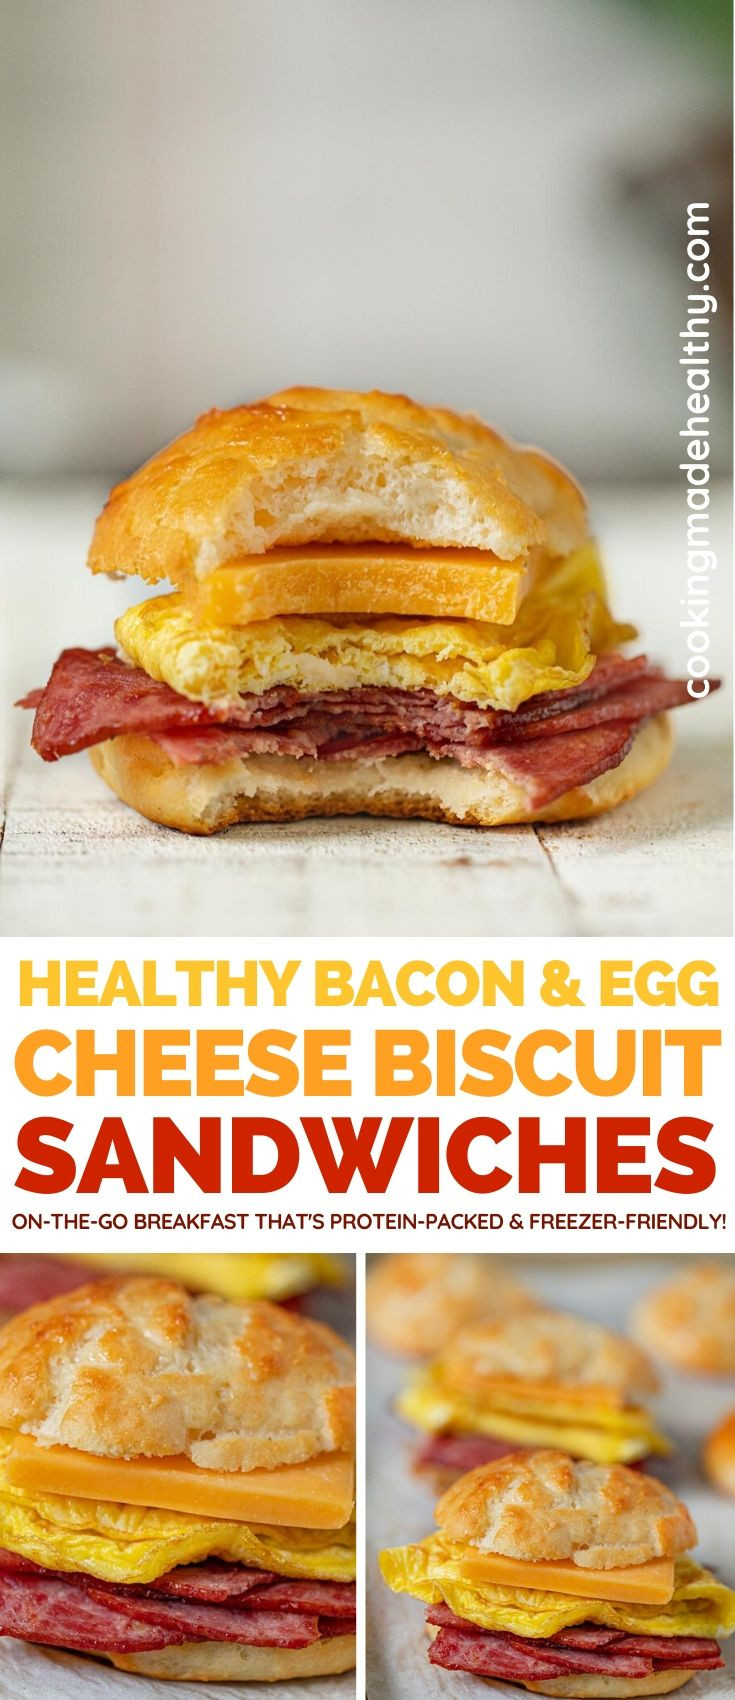 Chick Fil A Bacon Egg &amp; Cheese Biscuit
 Healthy Bacon Egg & Cheese Biscuits 2 Ing Dough